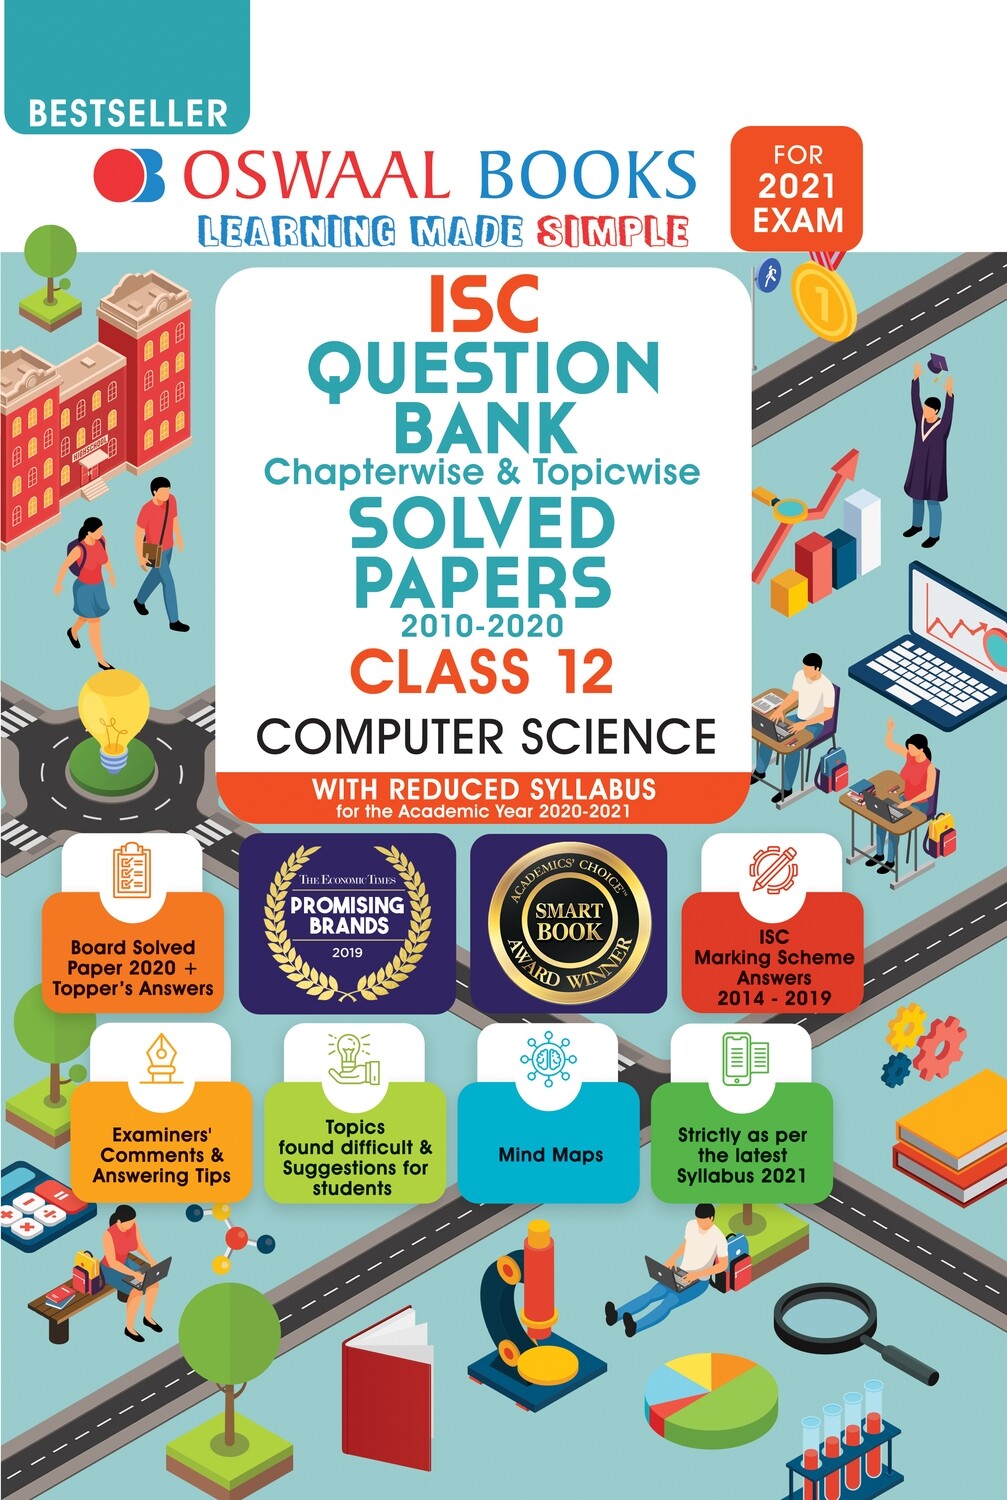 Buy e-book: Oswaal ISC Question Bank Chapterwise & Topicwise Solved Papers, Computer Science, Class 12 (Reduced